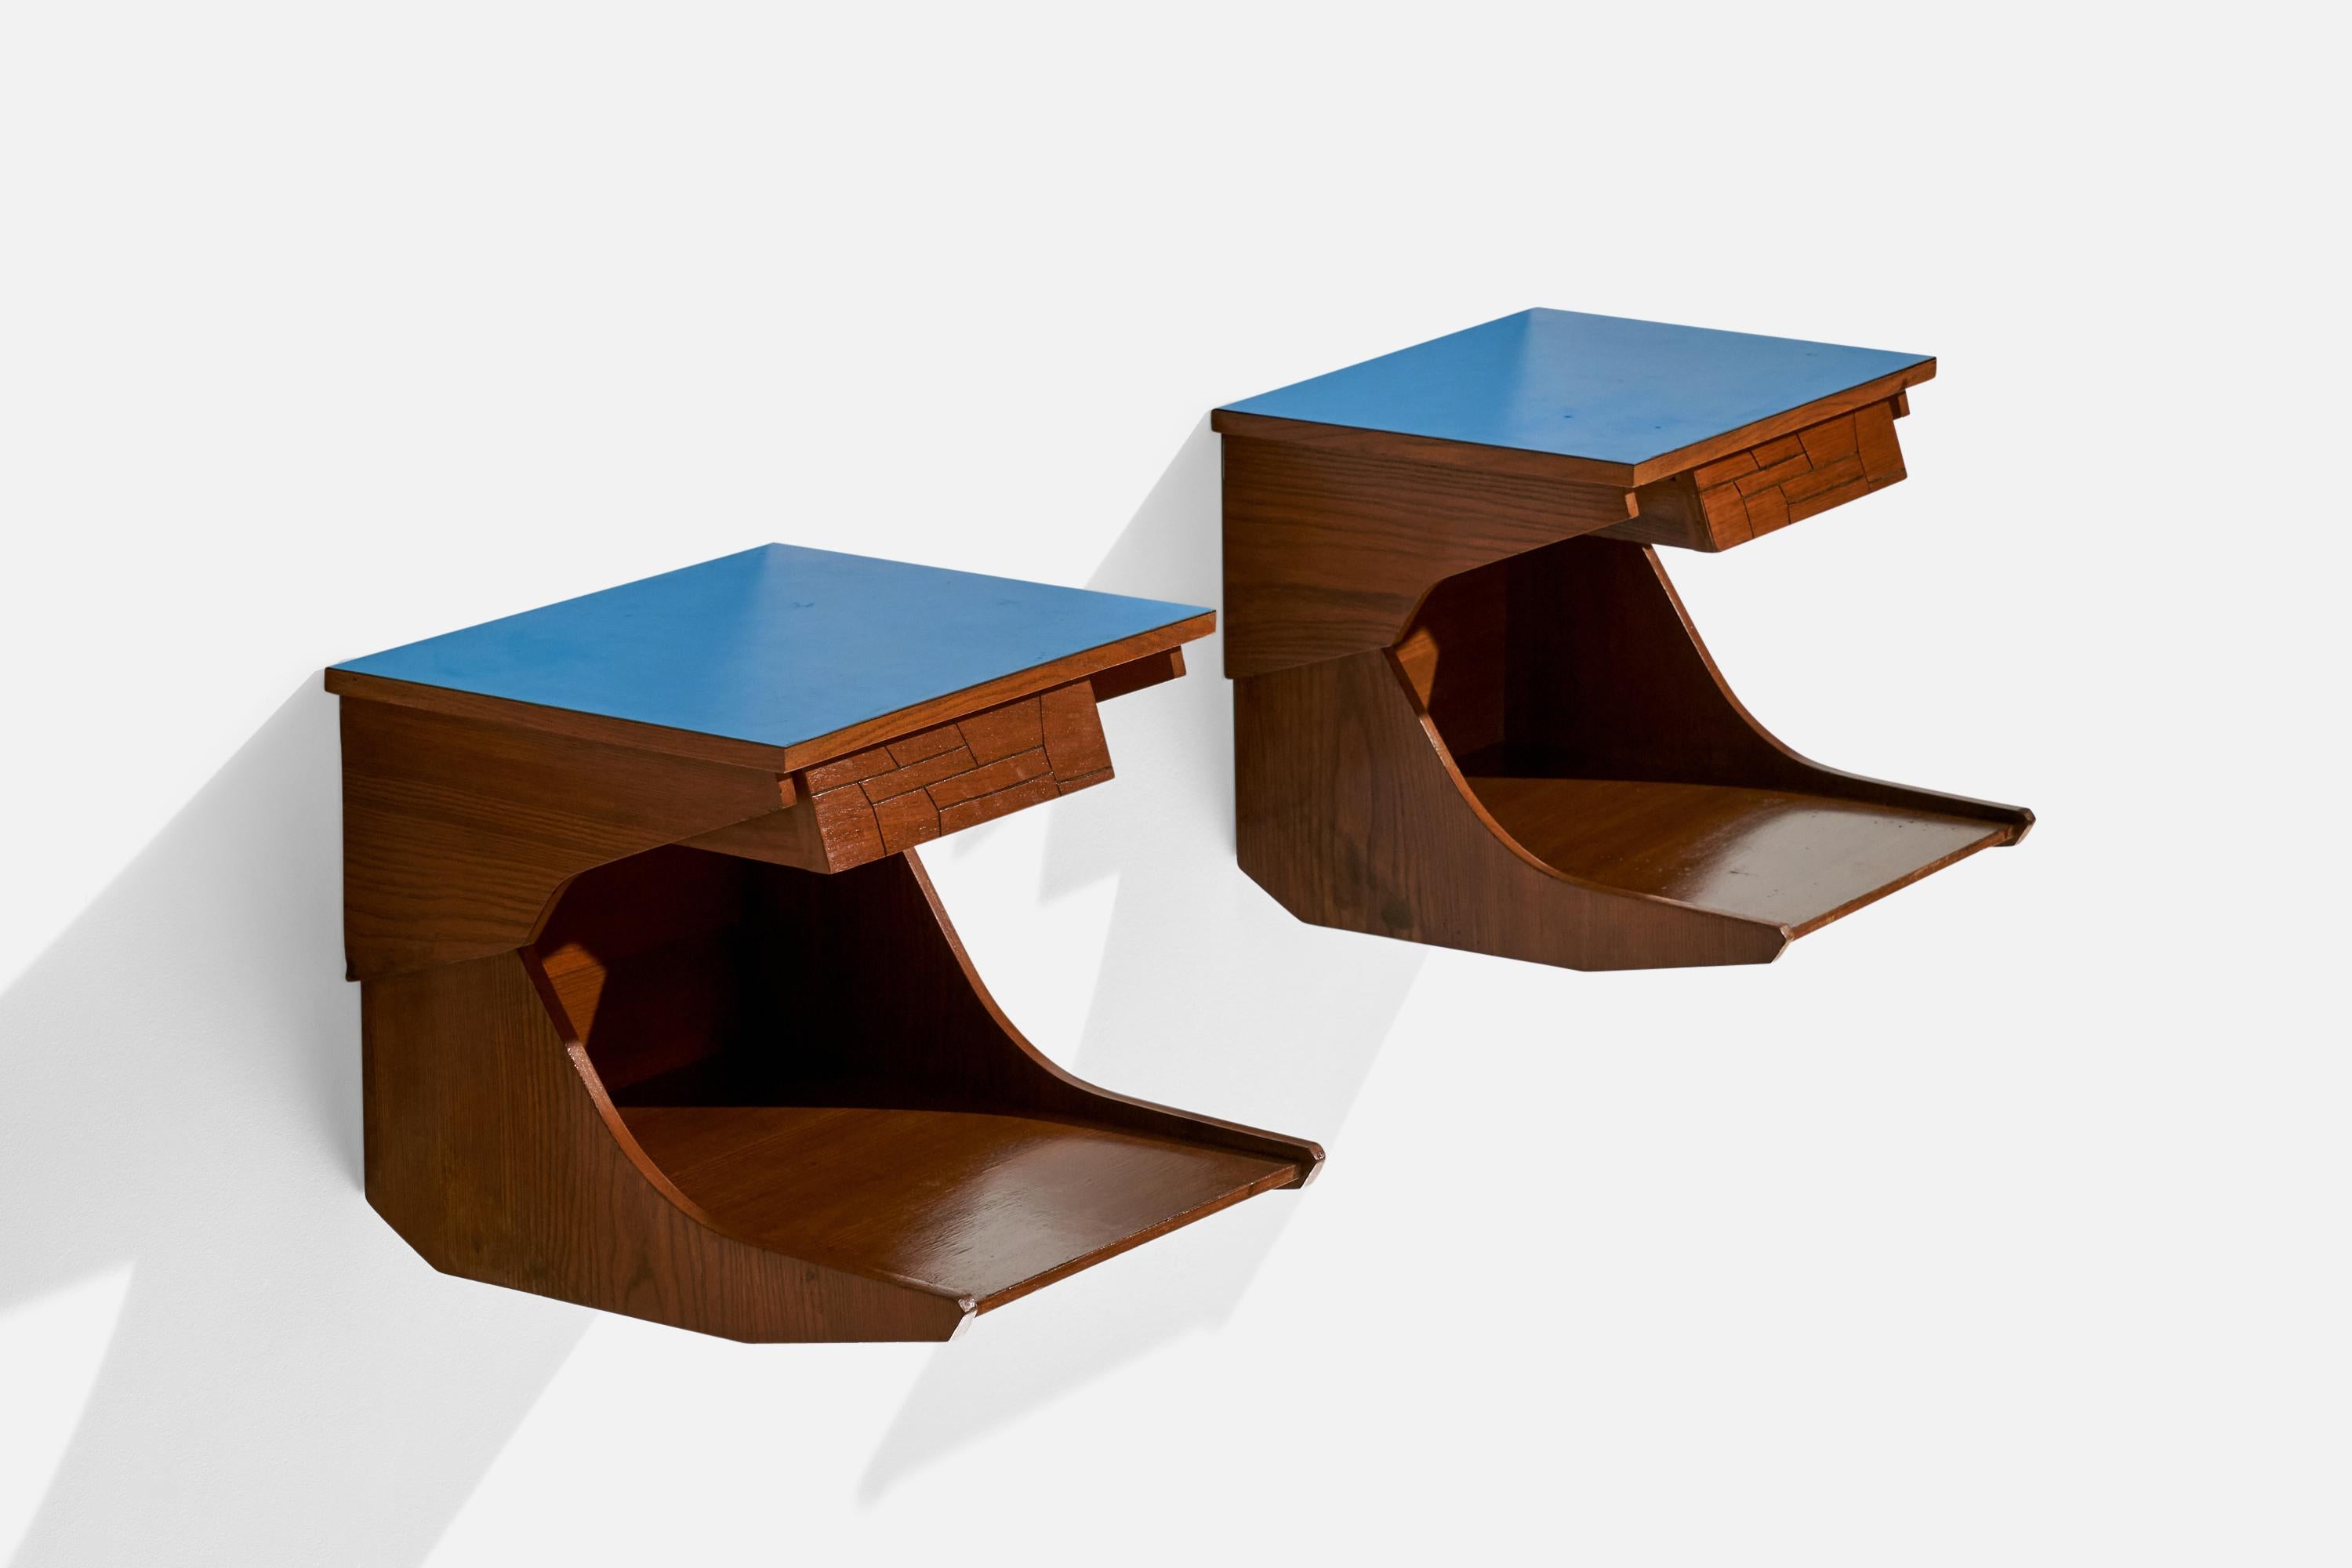 A pair of walnut and blue-laminate wall mounted nightstands designed and produced in Italy, dated 1956.